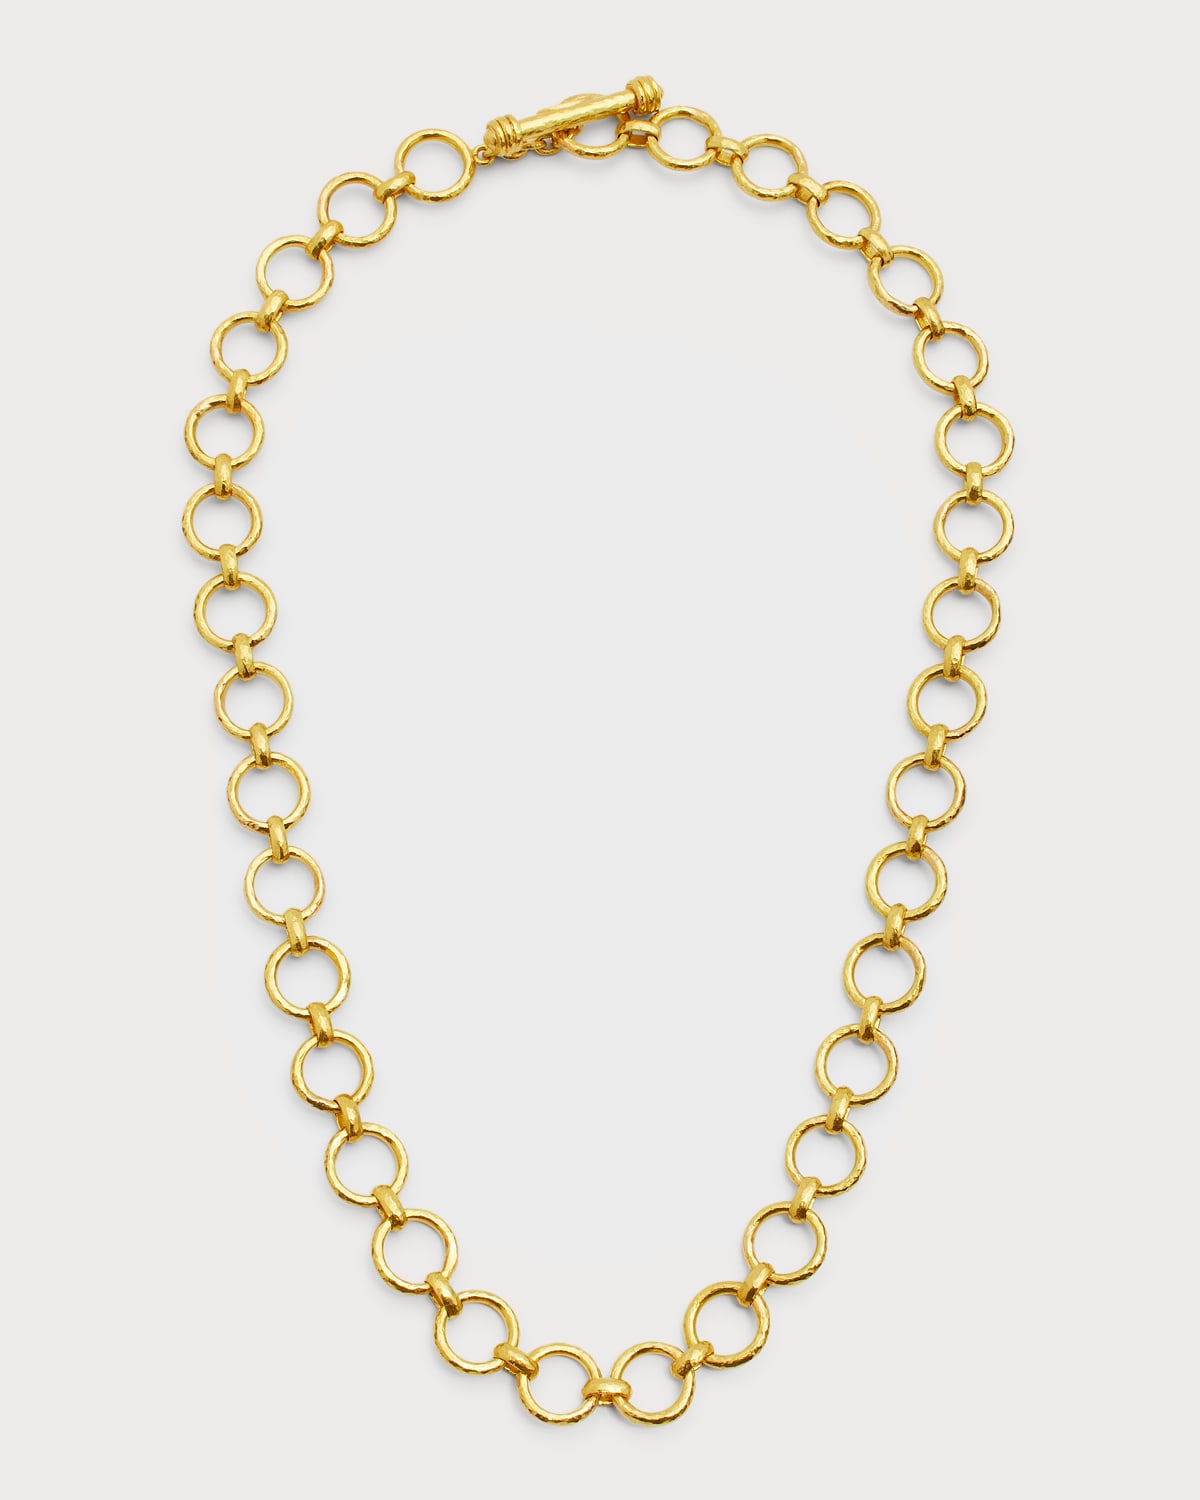 Elizabeth Locke 19K Yellow Gold Large Farnese Link Necklace with Toggle, 21"L